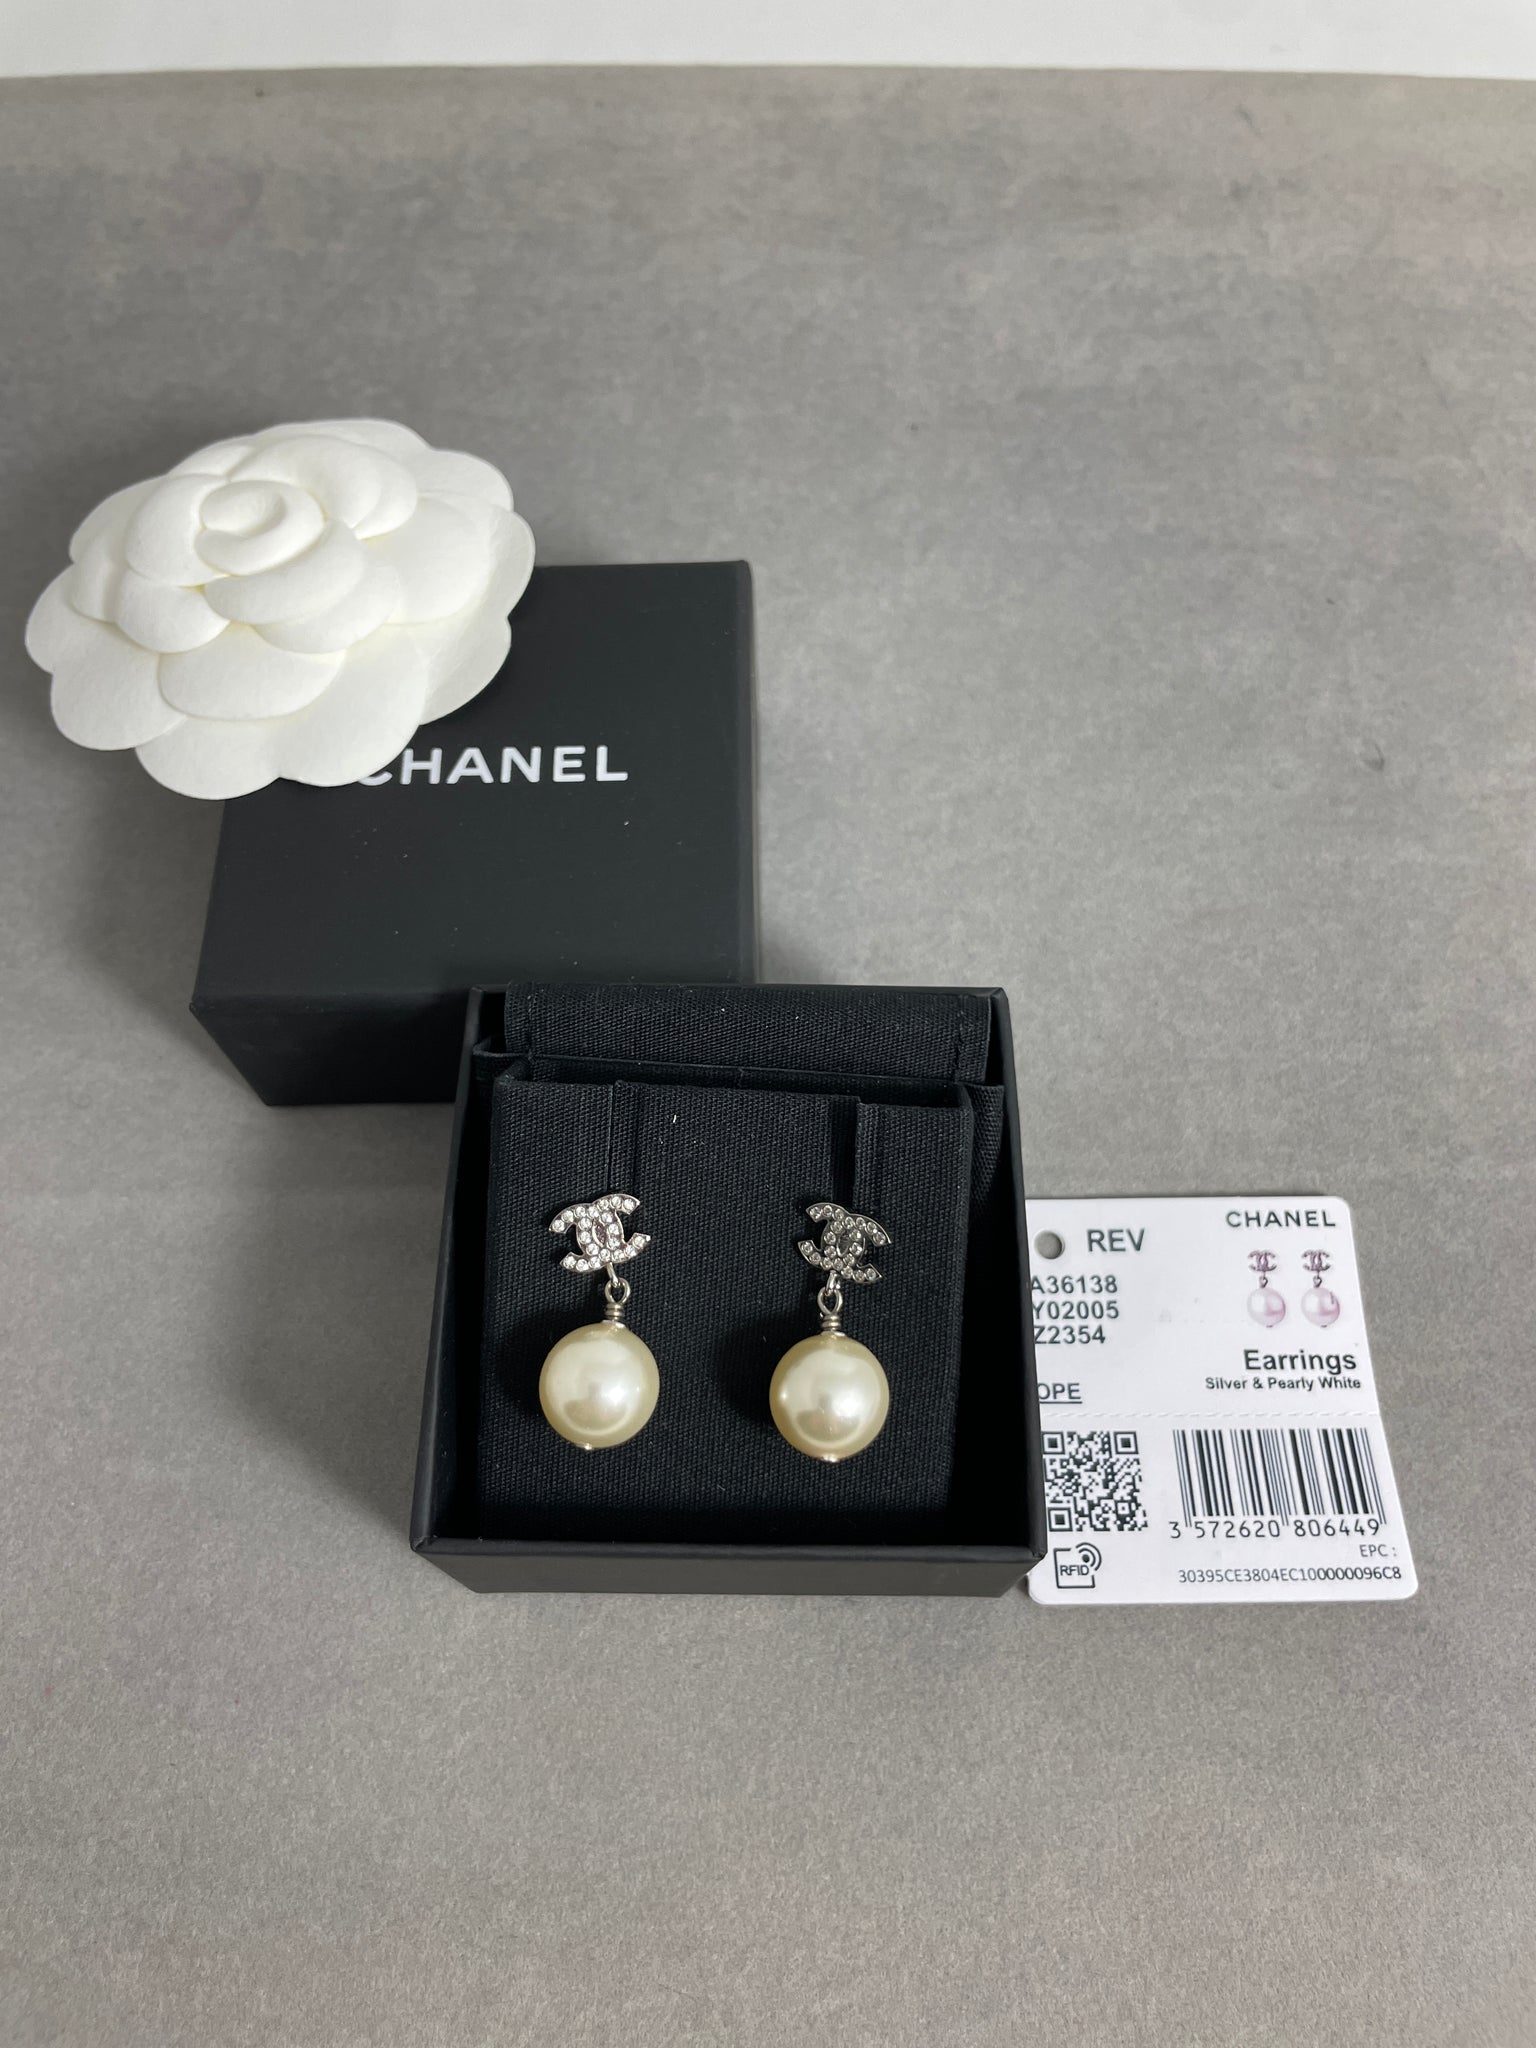 chanel – Page 21 – VSP Consignment